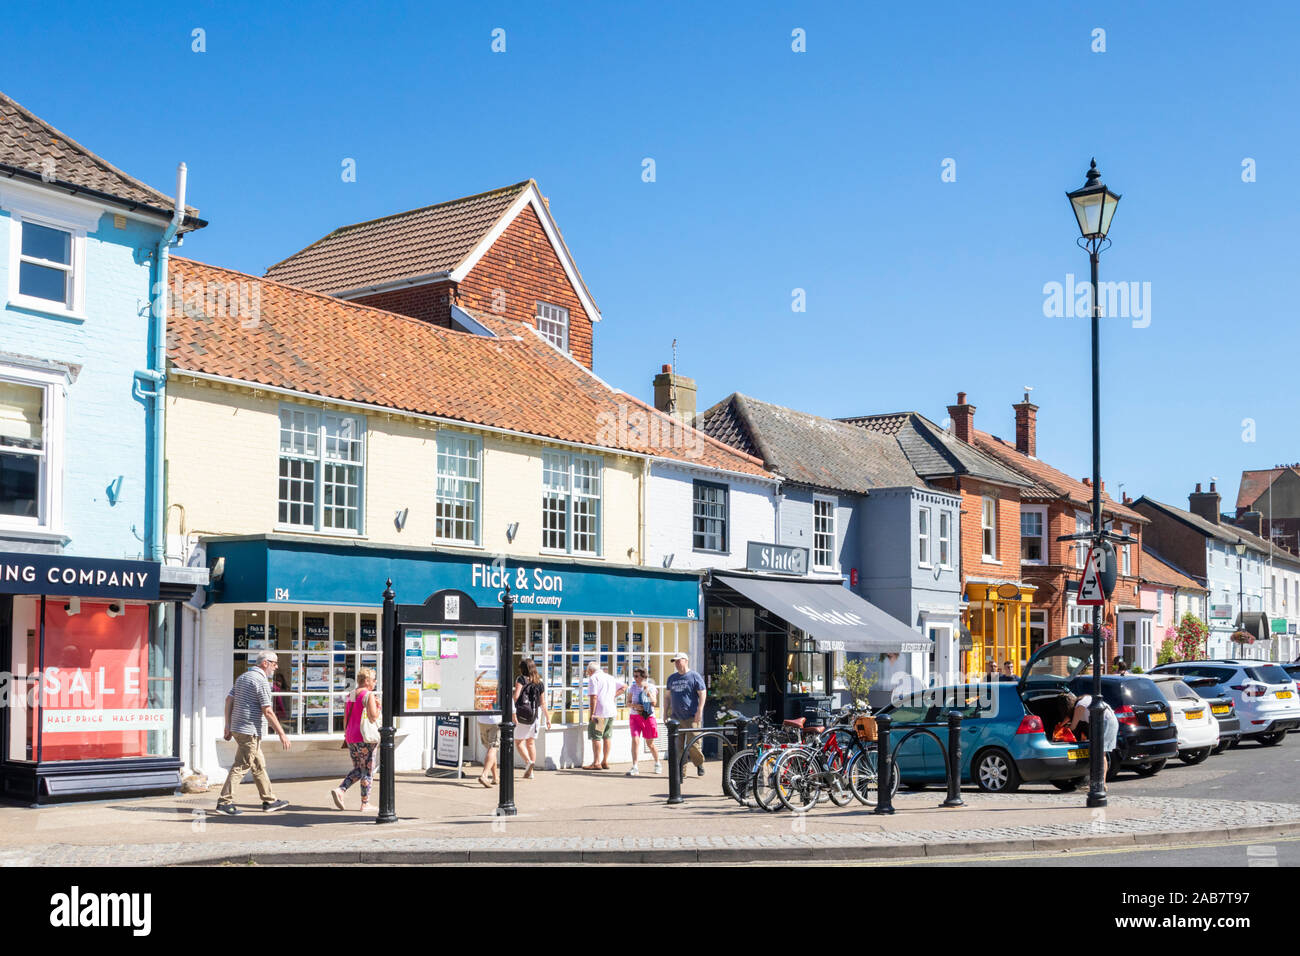 Aldeburgh High Street with people browsing through small shops, Aldeburgh, Suffolk, England, United Kingdom, Europe Stock Photo